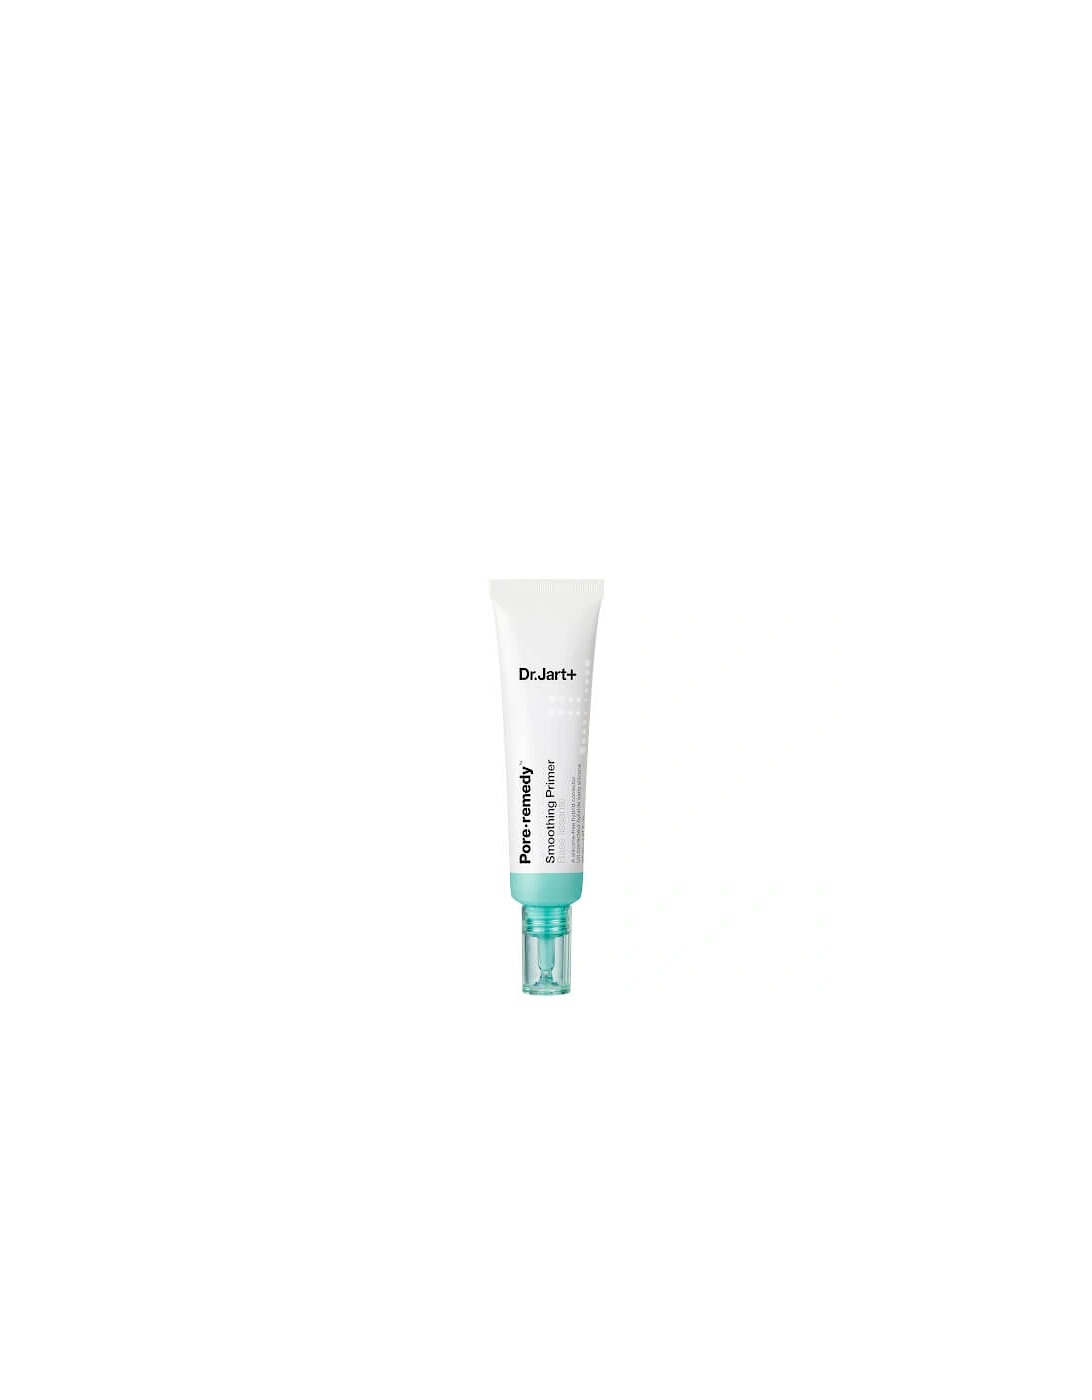 Dr.Jart+ Pore Remedy Soothing Primer 30ml, 2 of 1